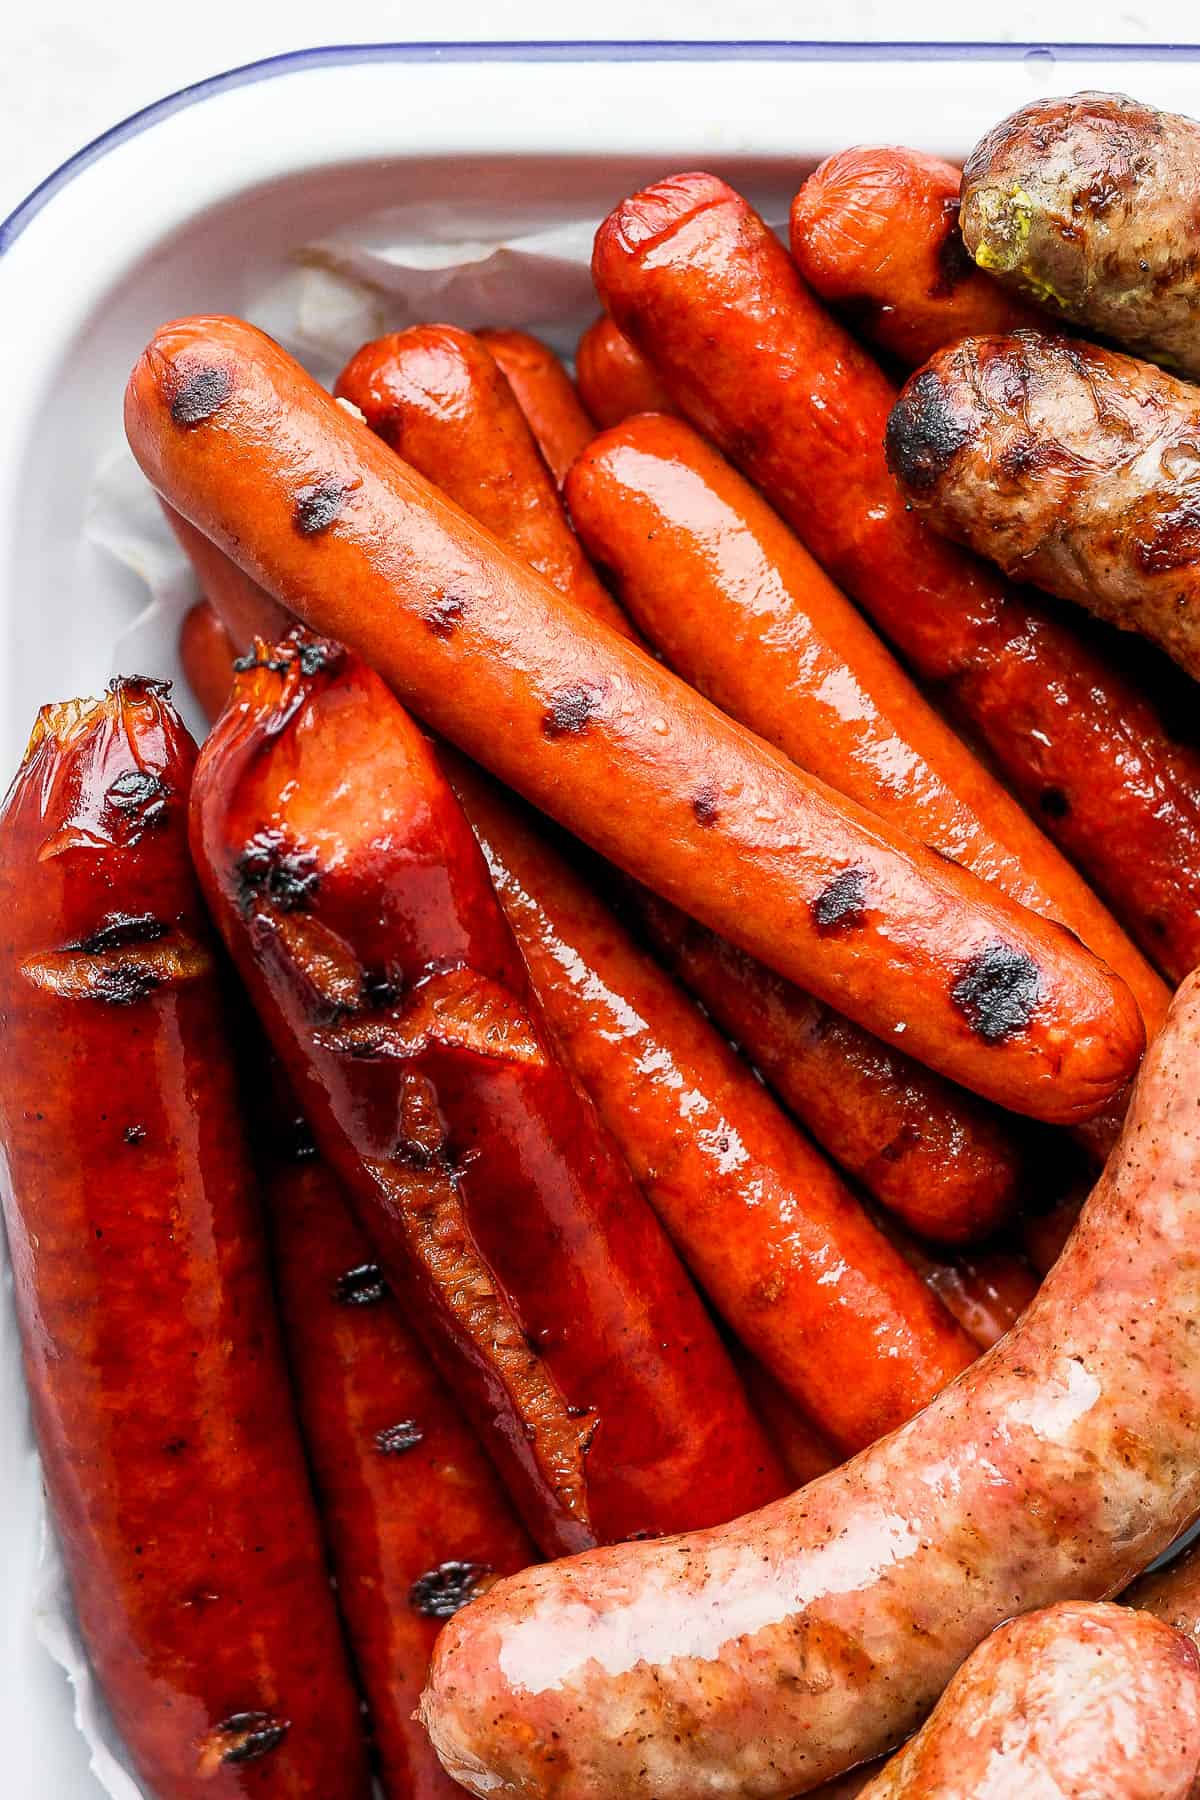 Grilled hot dogs and grilled brats in a large tray.